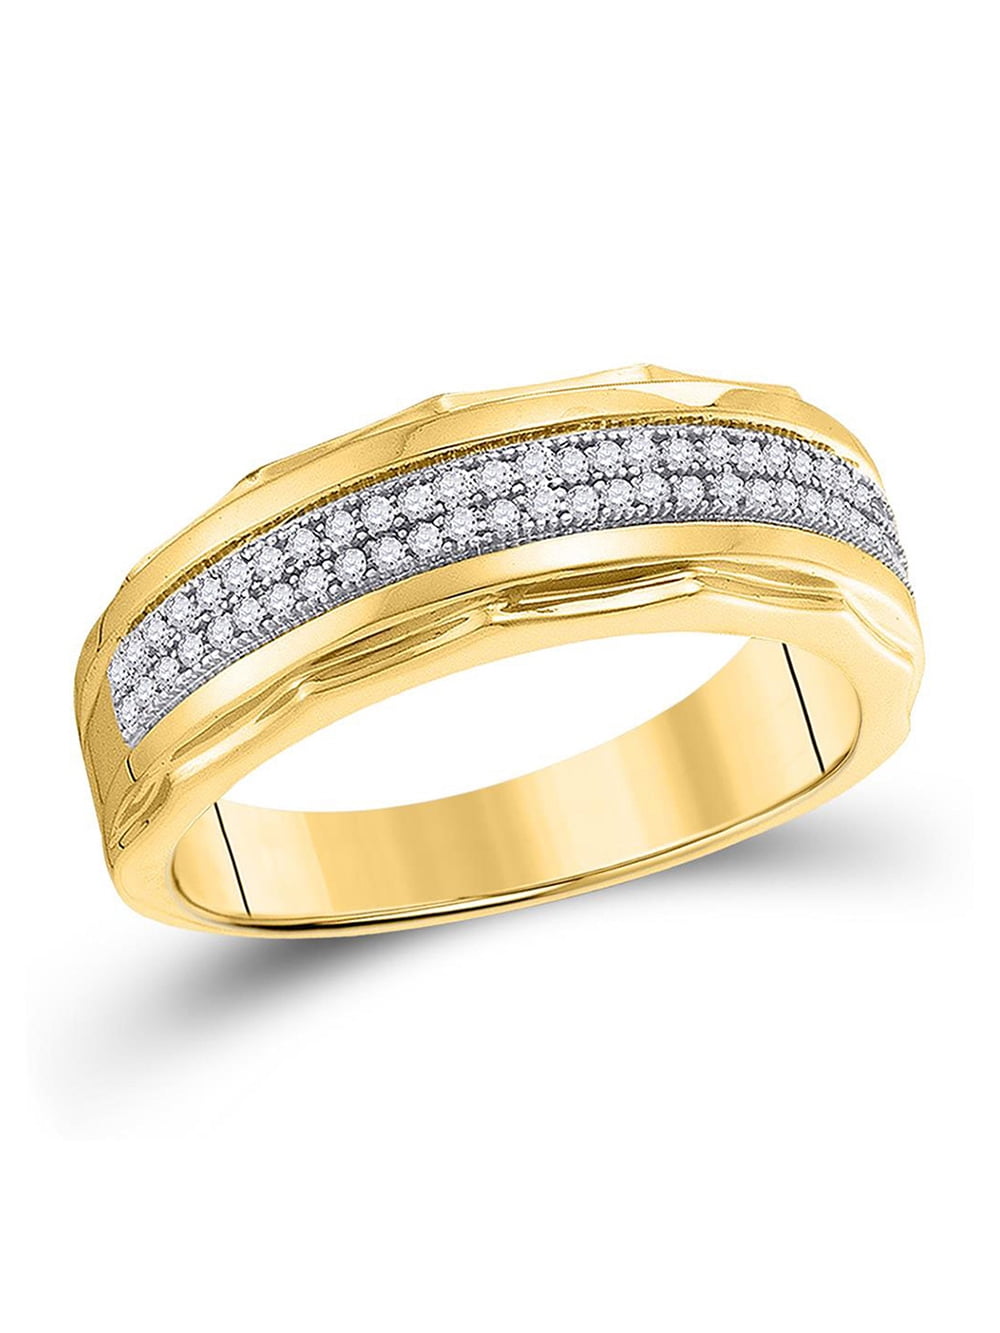 Details about   Real 14Kt Yellow Gold Plain Gold Cross Ring Band